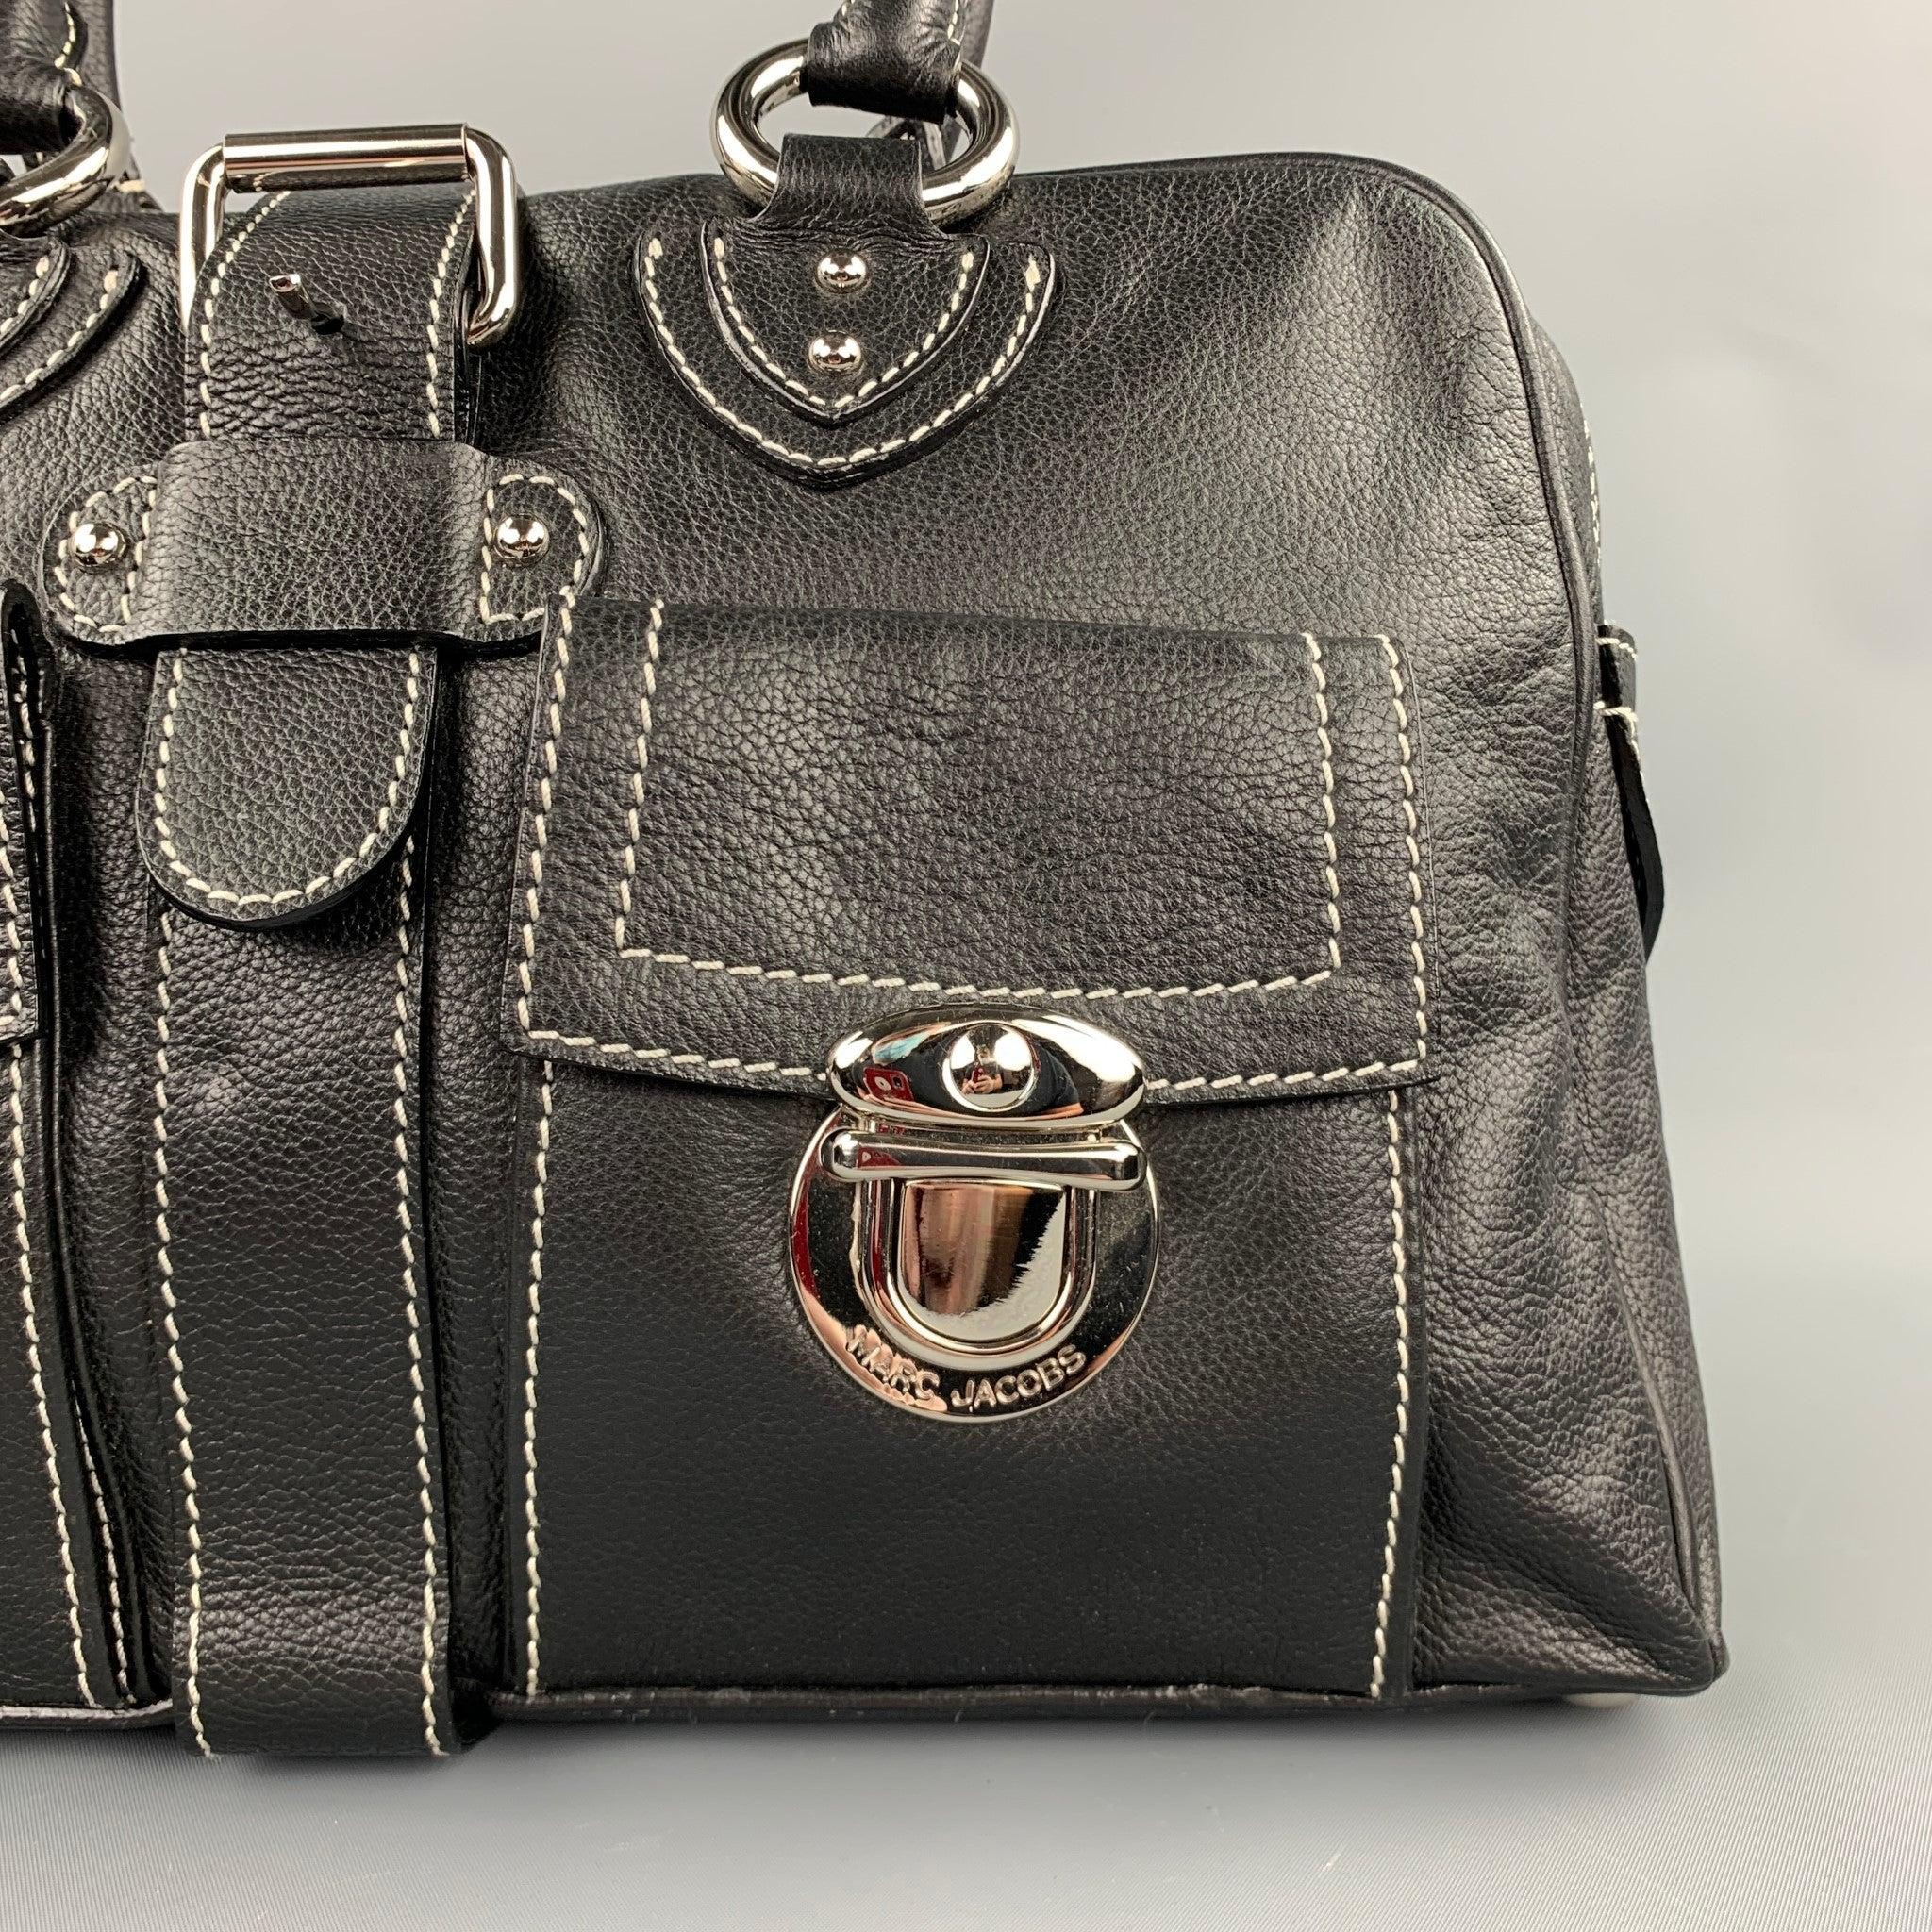 MARC JACOBS handbag comes in a black leather with contrast stitching, front pockets, silver tone hardware, inner slots, and a zip up closure. Made in Italy.Very Good
Pre-Owned Condition. 

Measurements: 
  Length: 15 inches 
Width: 3.5 inches